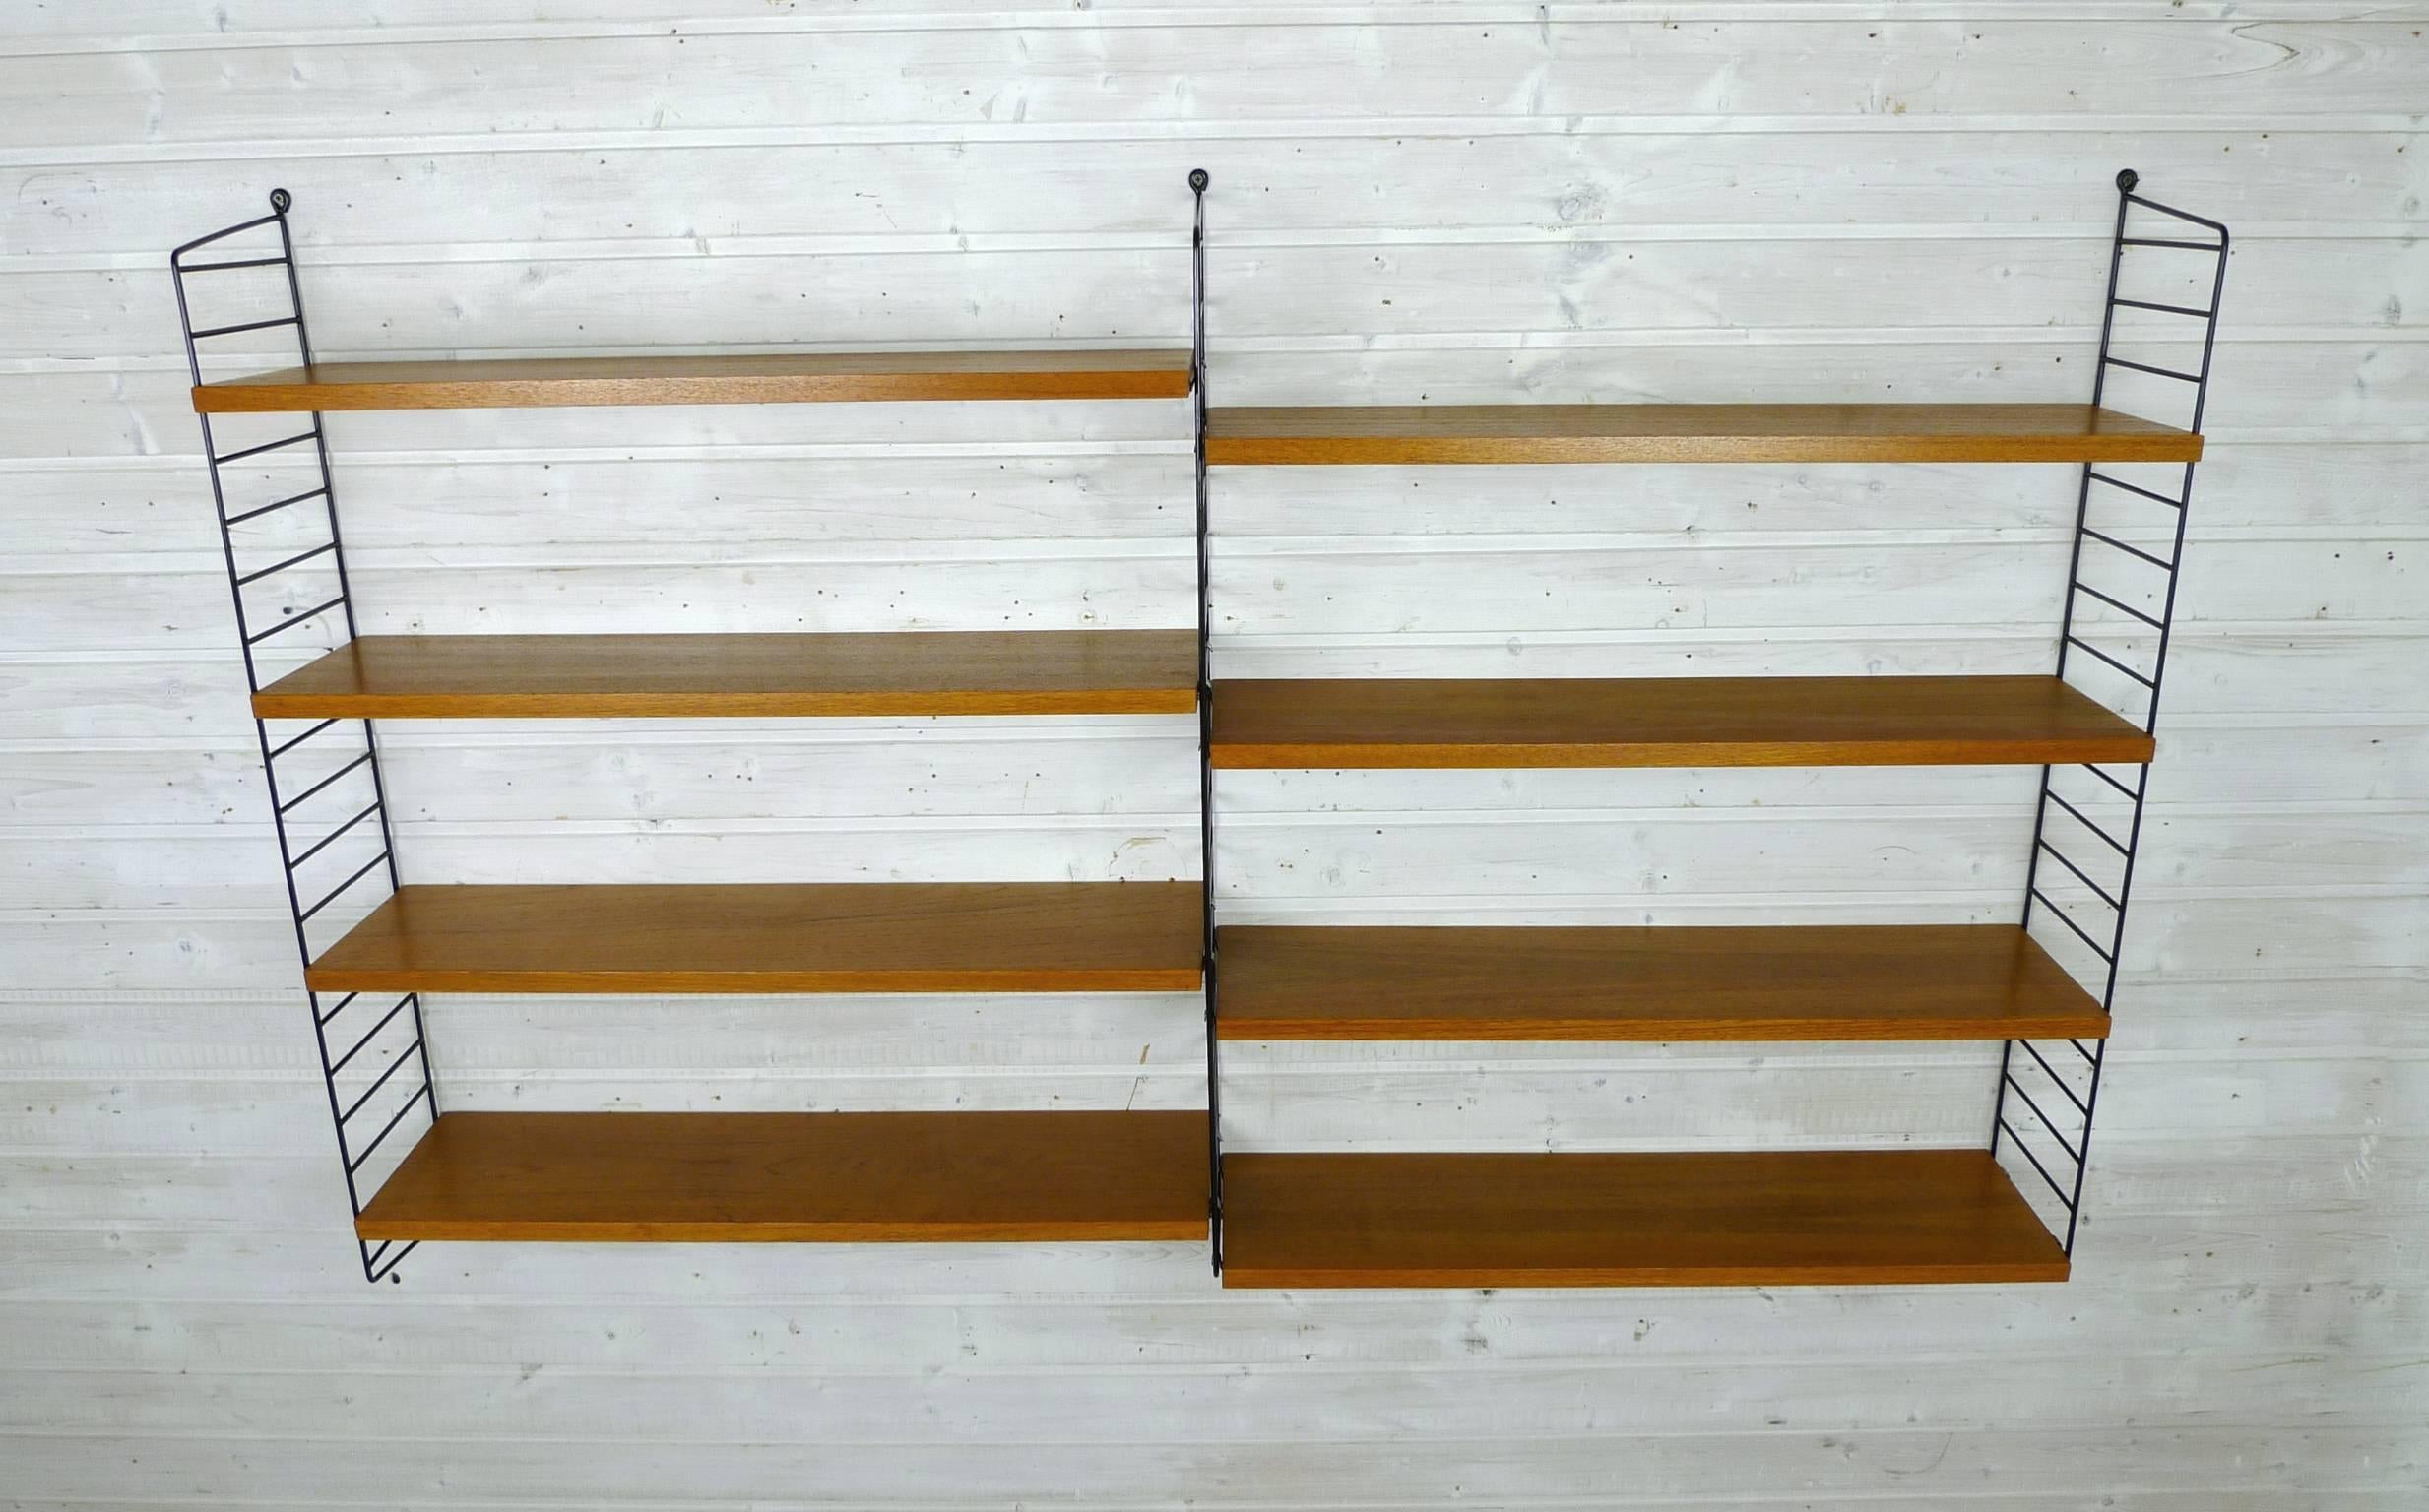 Nisse Strinning designed his famous shelf system in 1949. It was produced in his own company String Design AB in Sweden. 
This wall shelf consists of three black-coated ladders and eight shelves in teak with a depth of 20 cm. The shelf is in a good